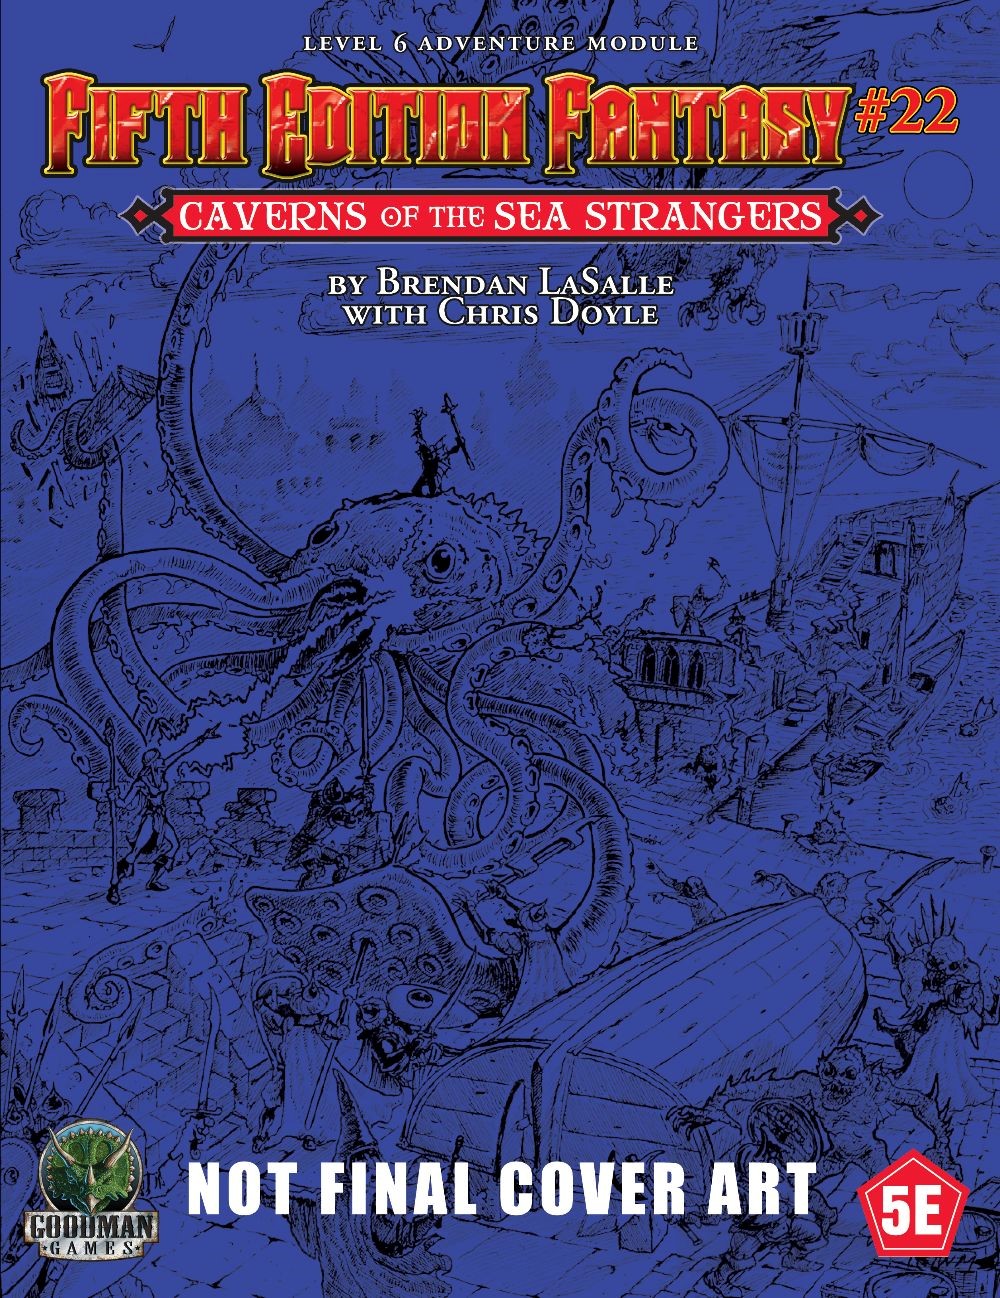 Dungeons & Dragons (5th Ed.): Fifth Edition Fantasy #22: CAVERN OF SEA STRANGERS 